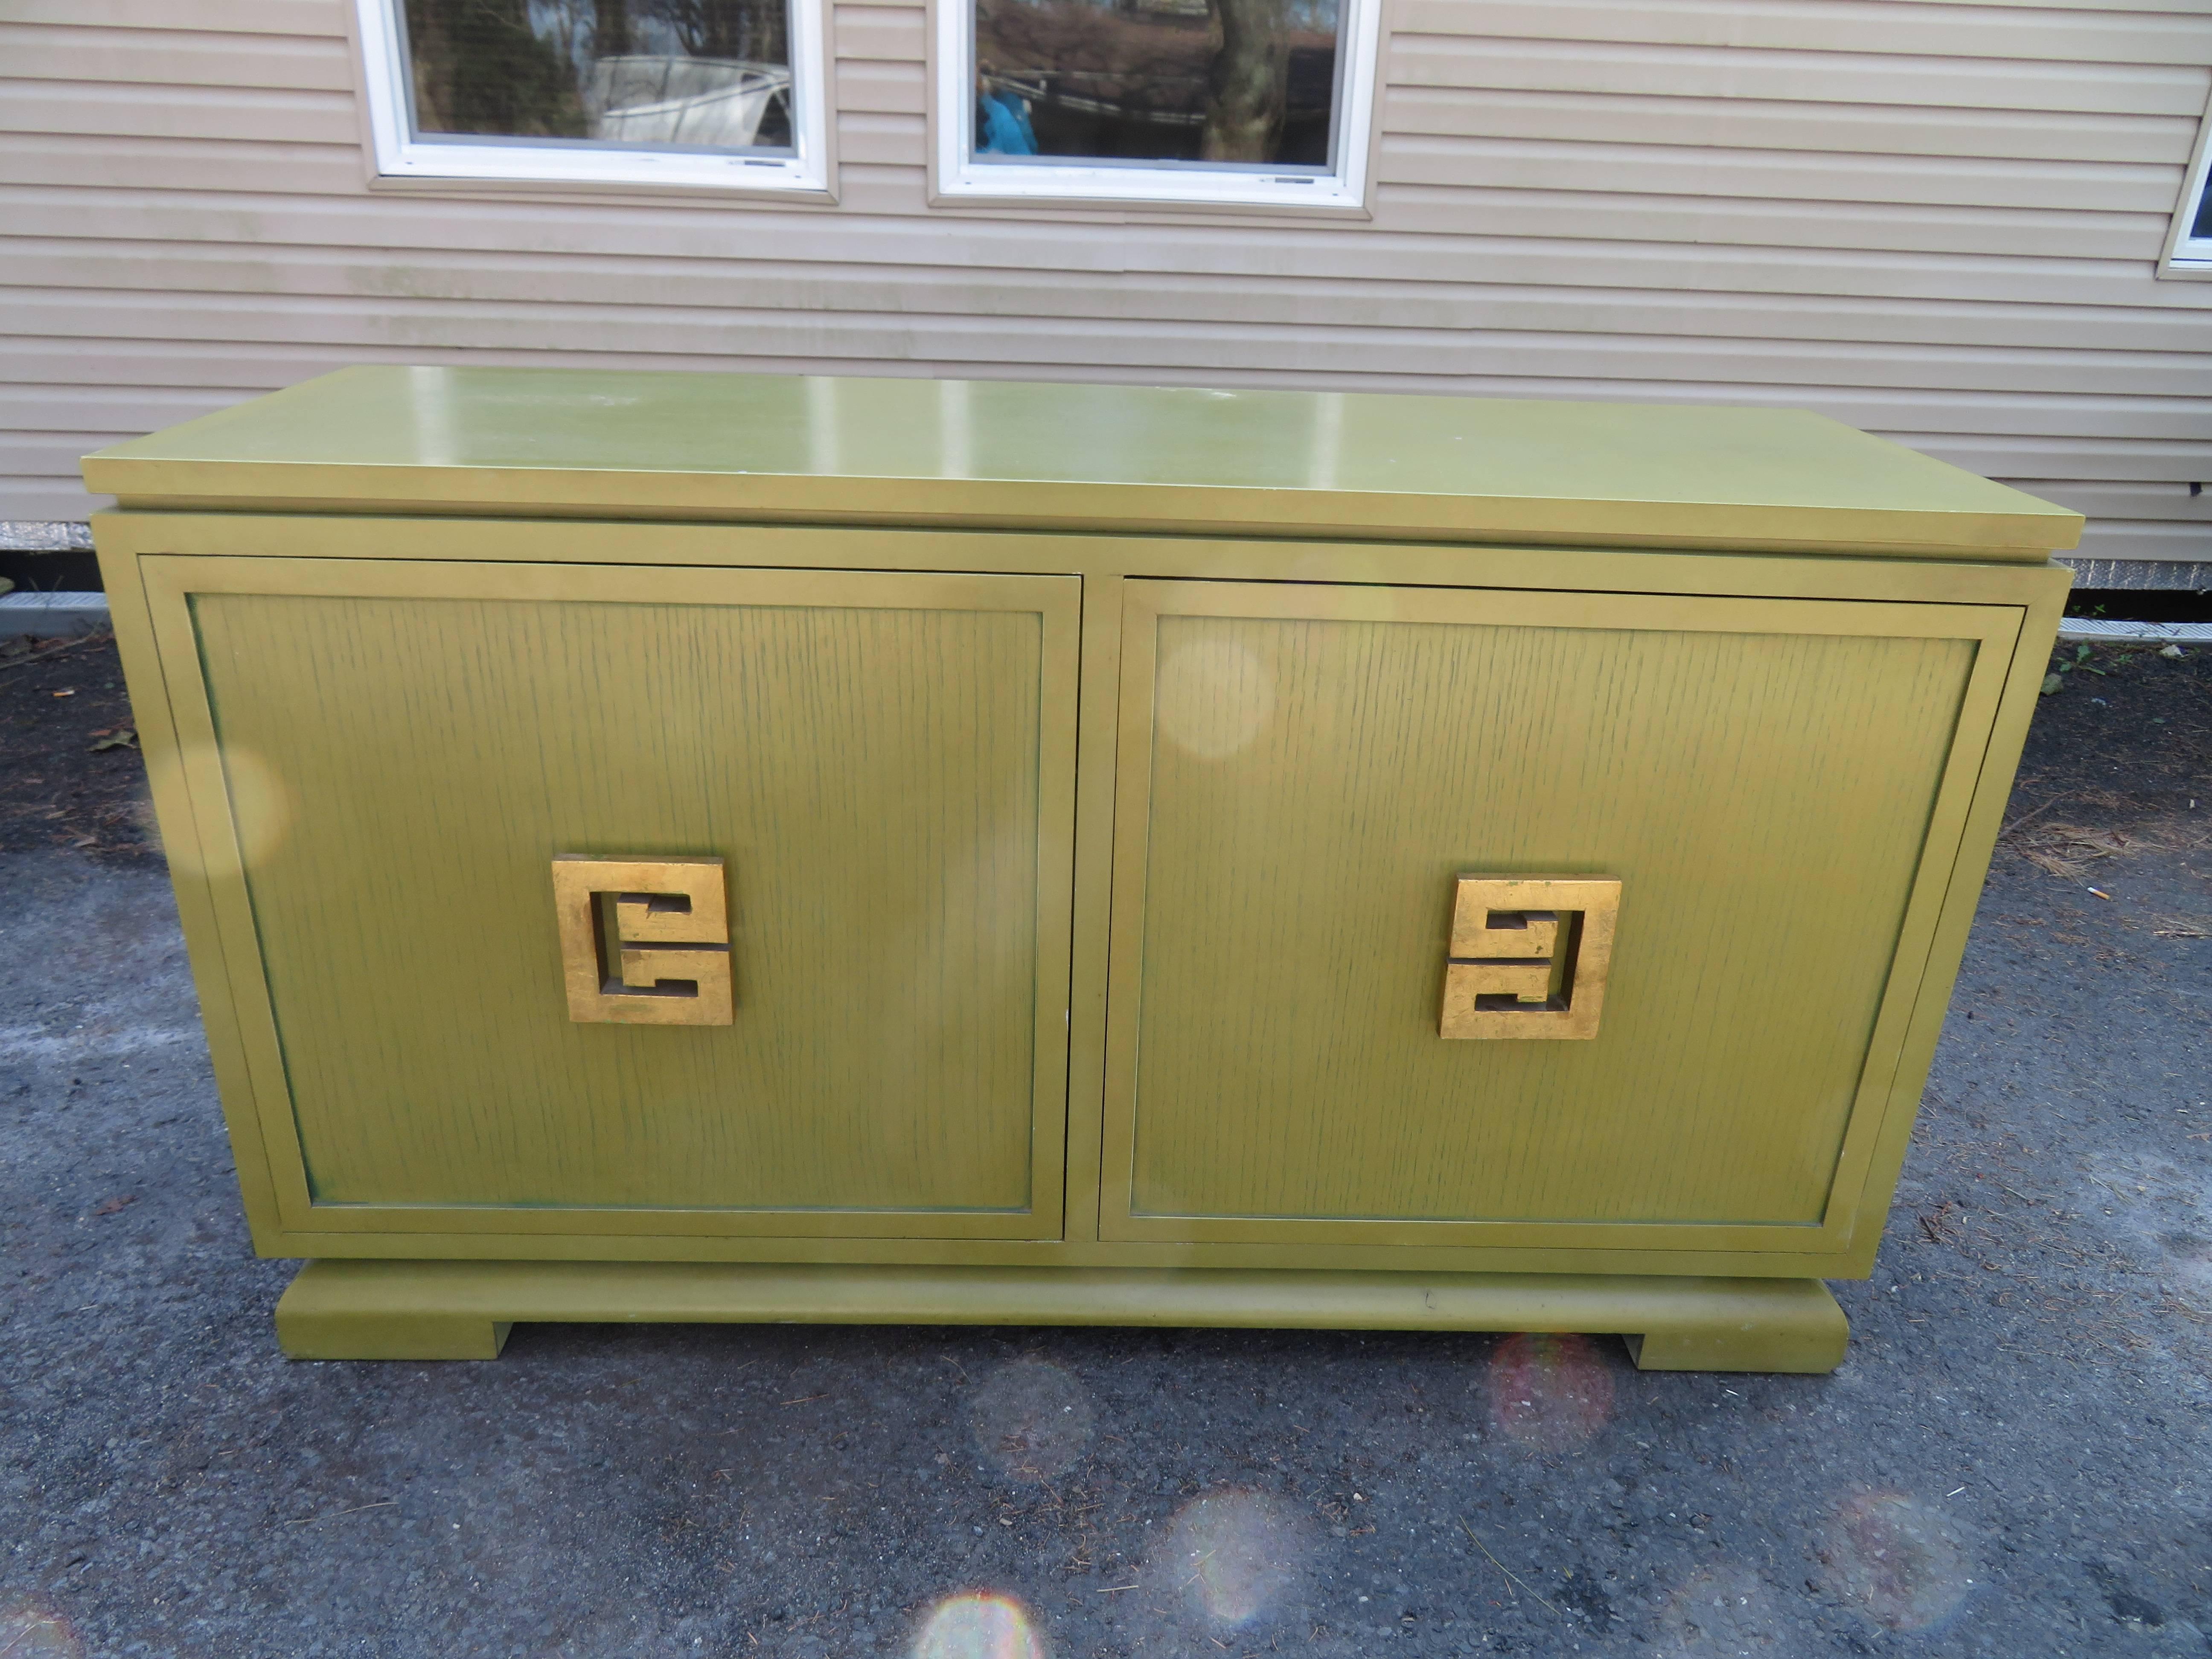 Handsome James Mont style Asian buffet credenza. We love everything about this wonderful piece from the gorgeous original lime green cerused finish to the extra tall stature- 34